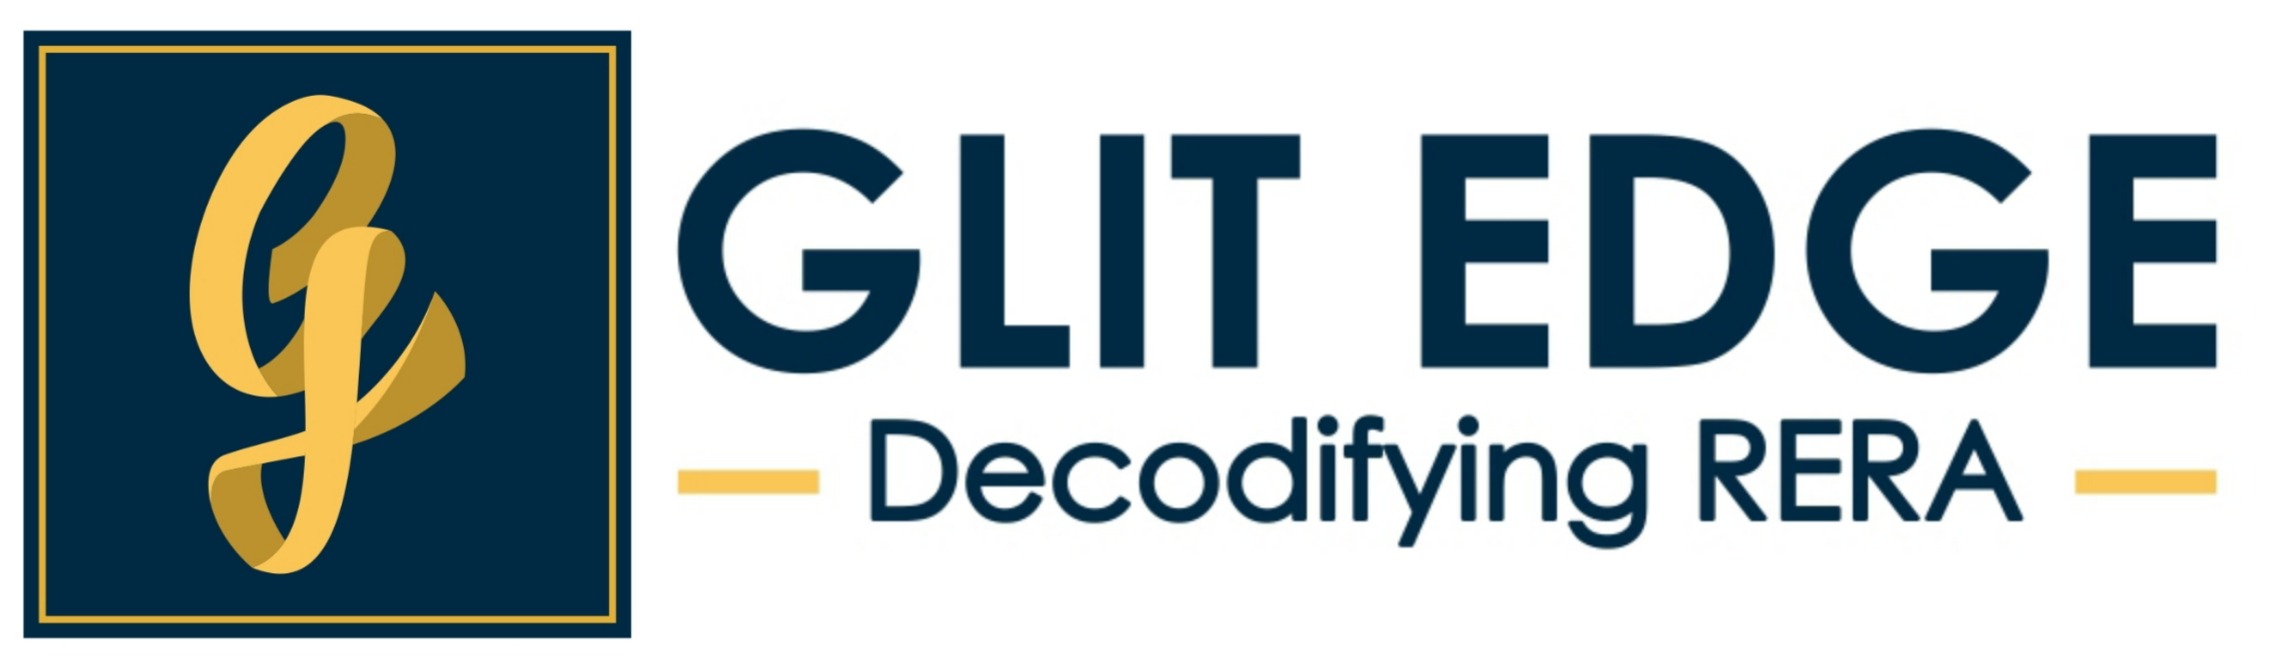 GILT-EDGE - A leading firm specialized in RERA services